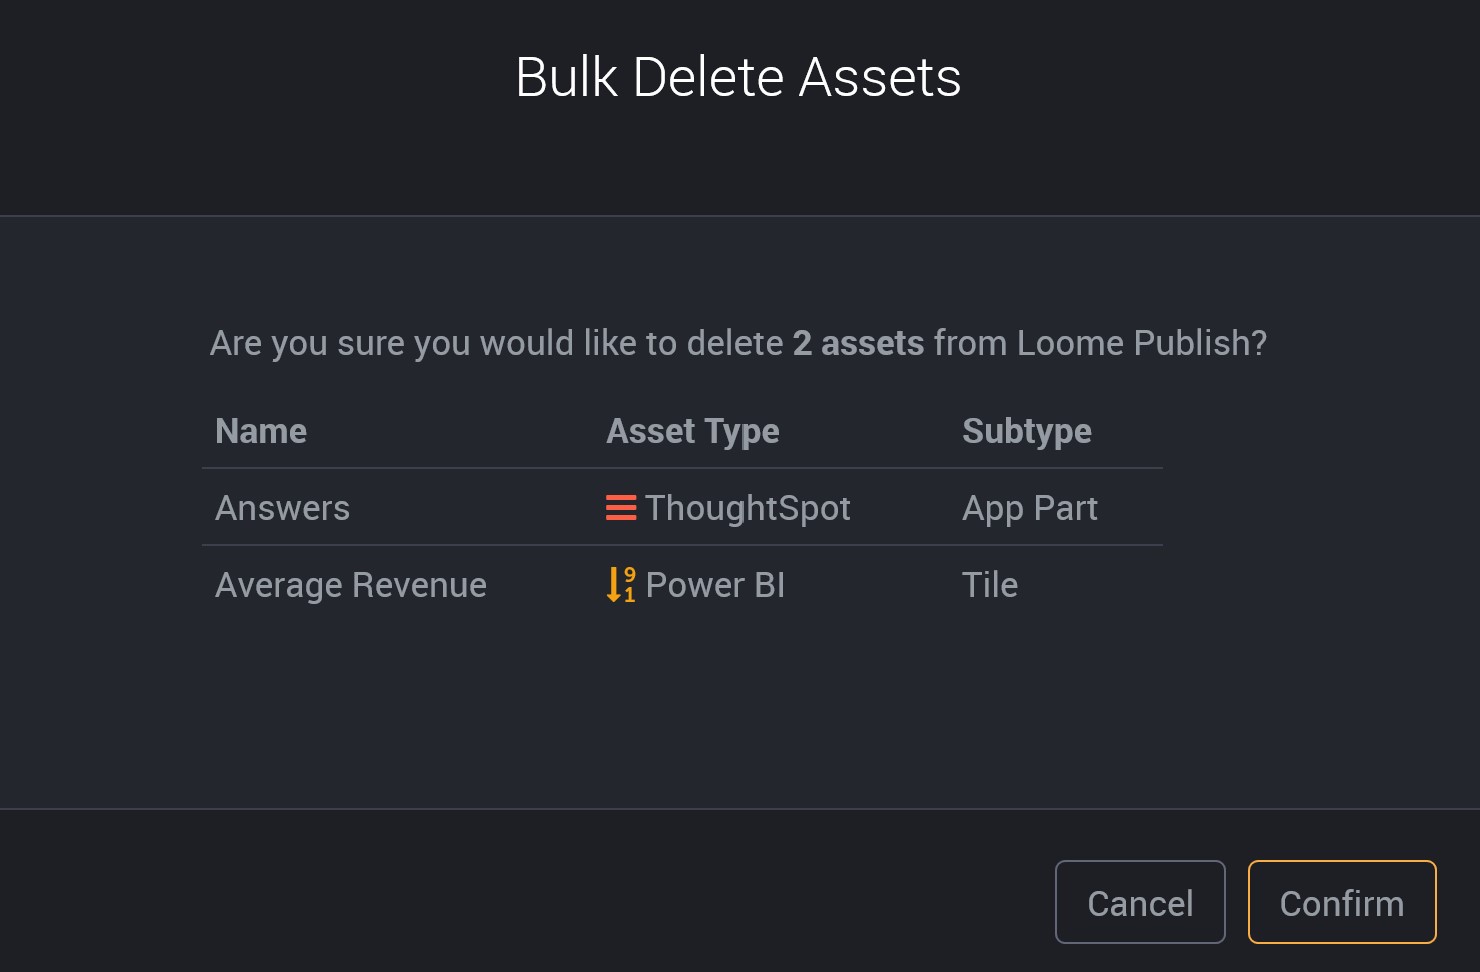 Confirm to delete assets